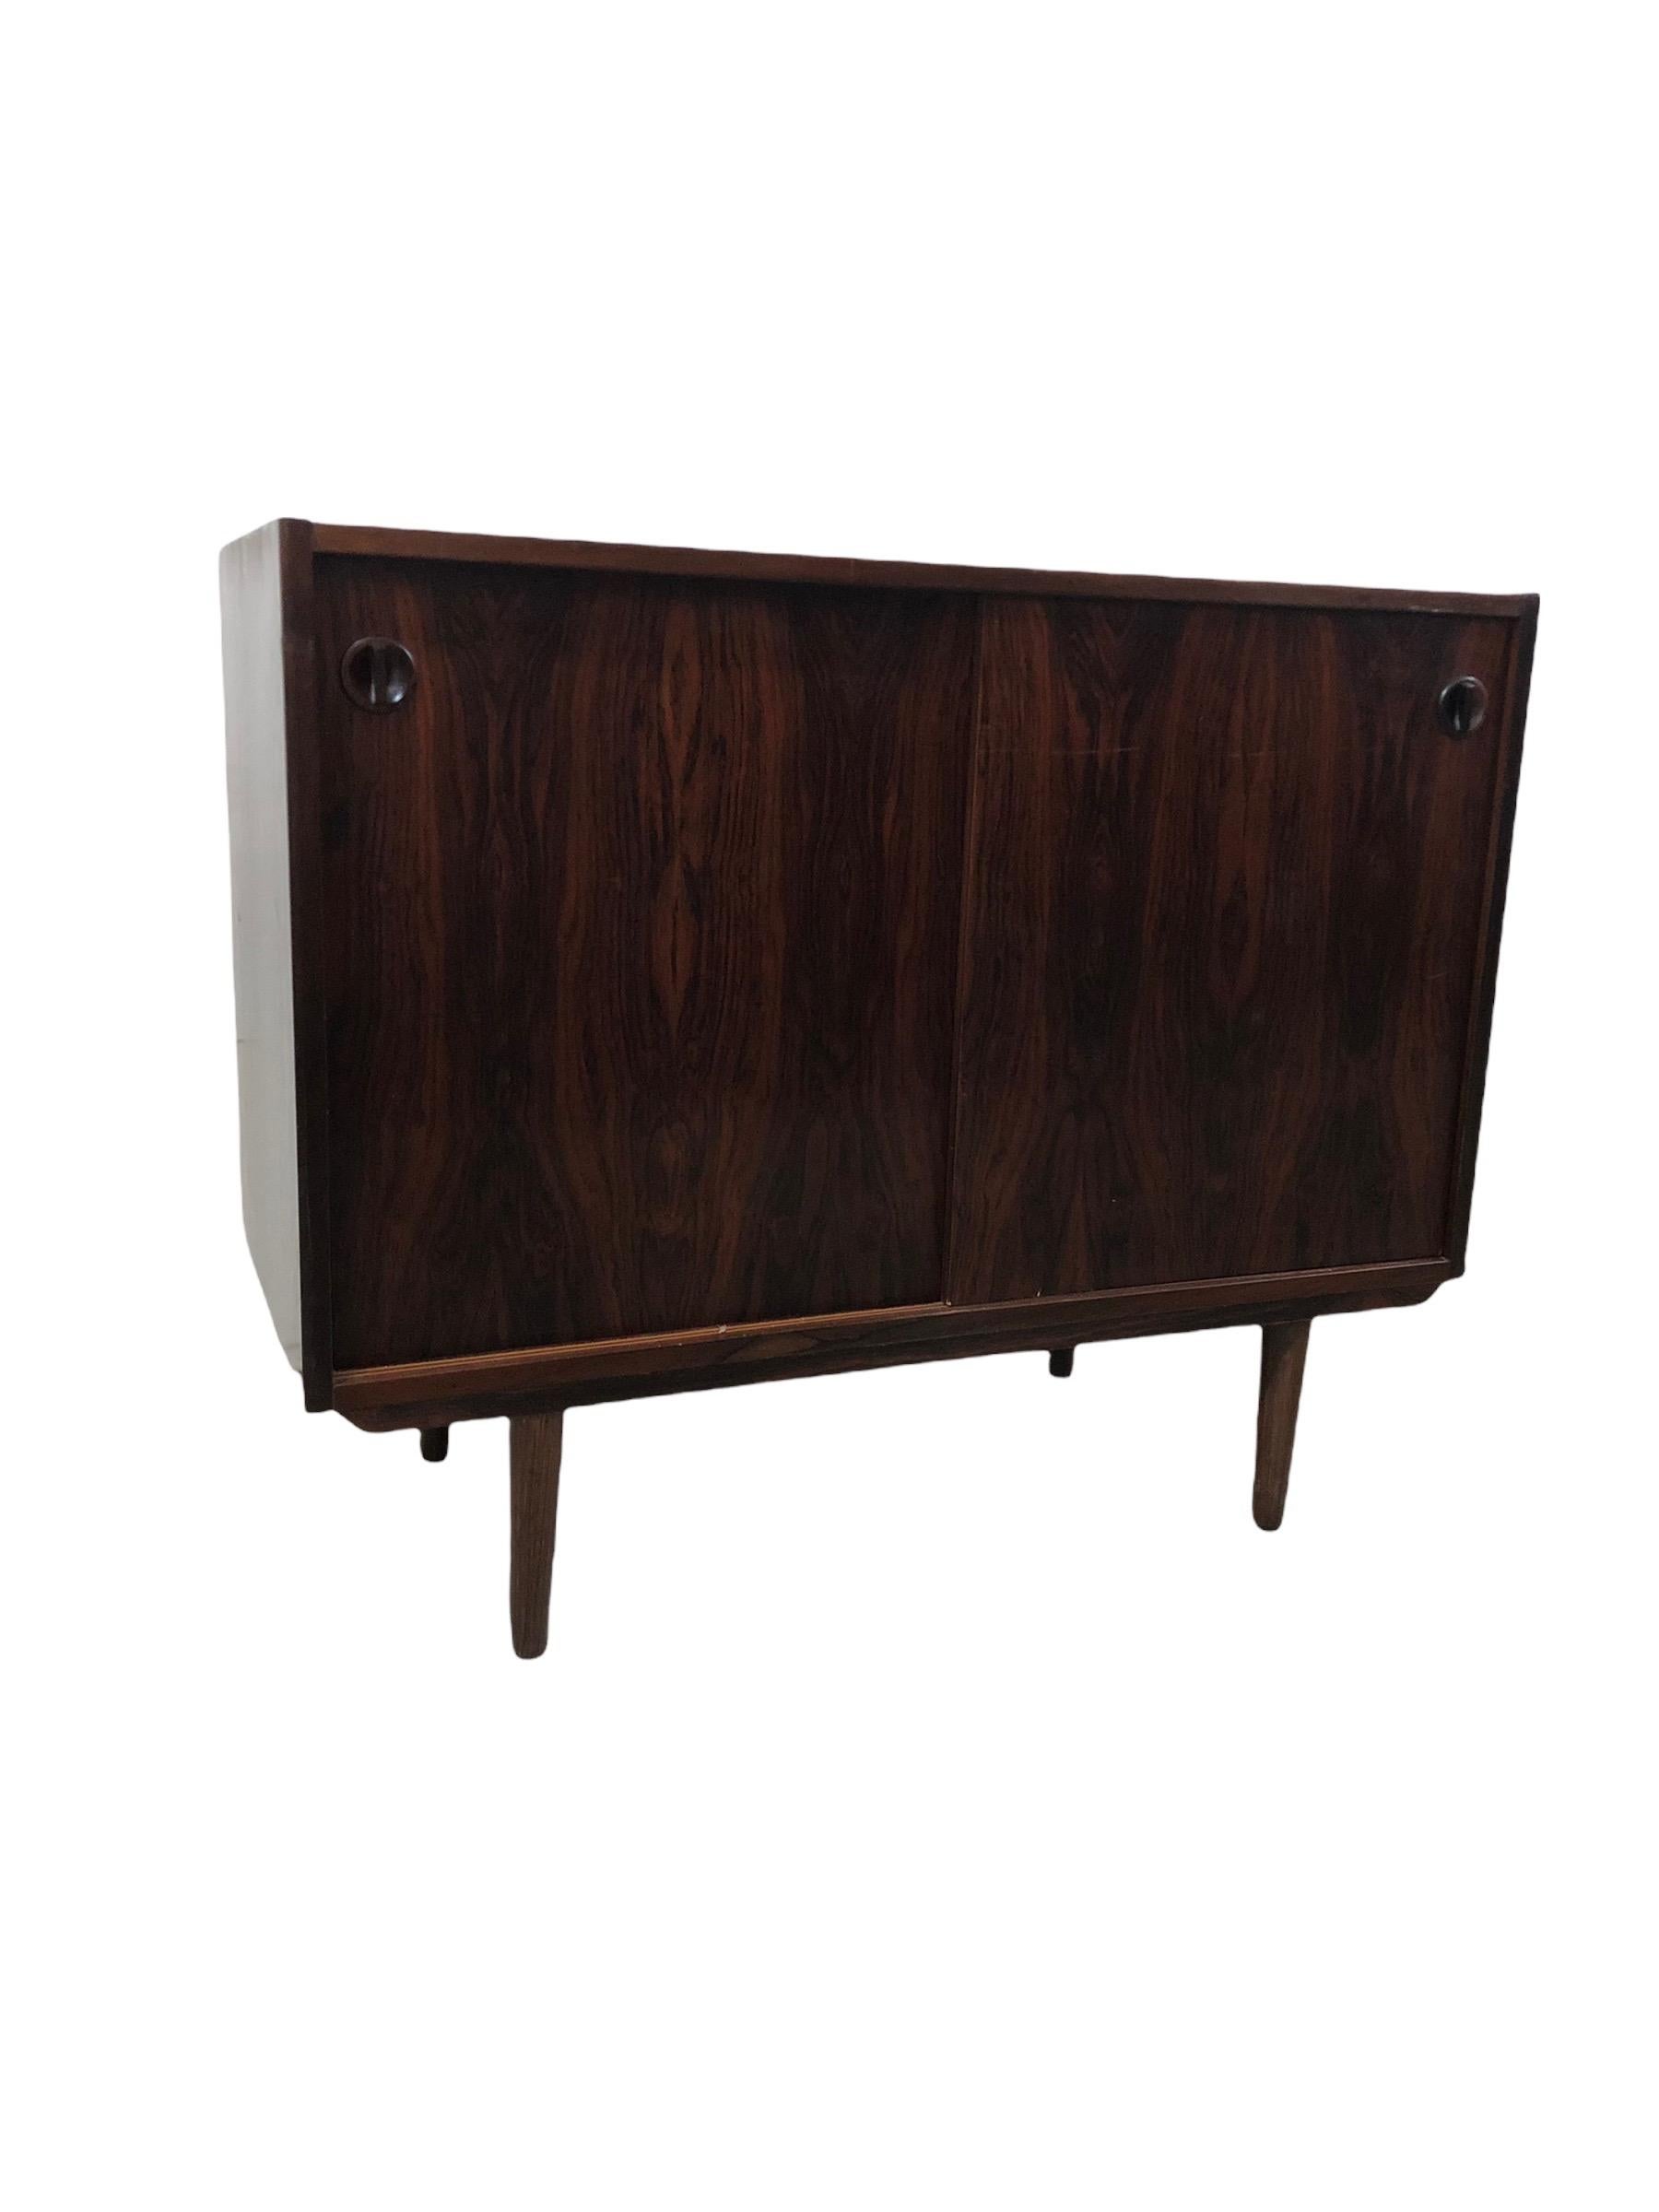 Rosewood Vintage Danish Mid-Century Modern Record Media Cabinet or Credenza For Sale